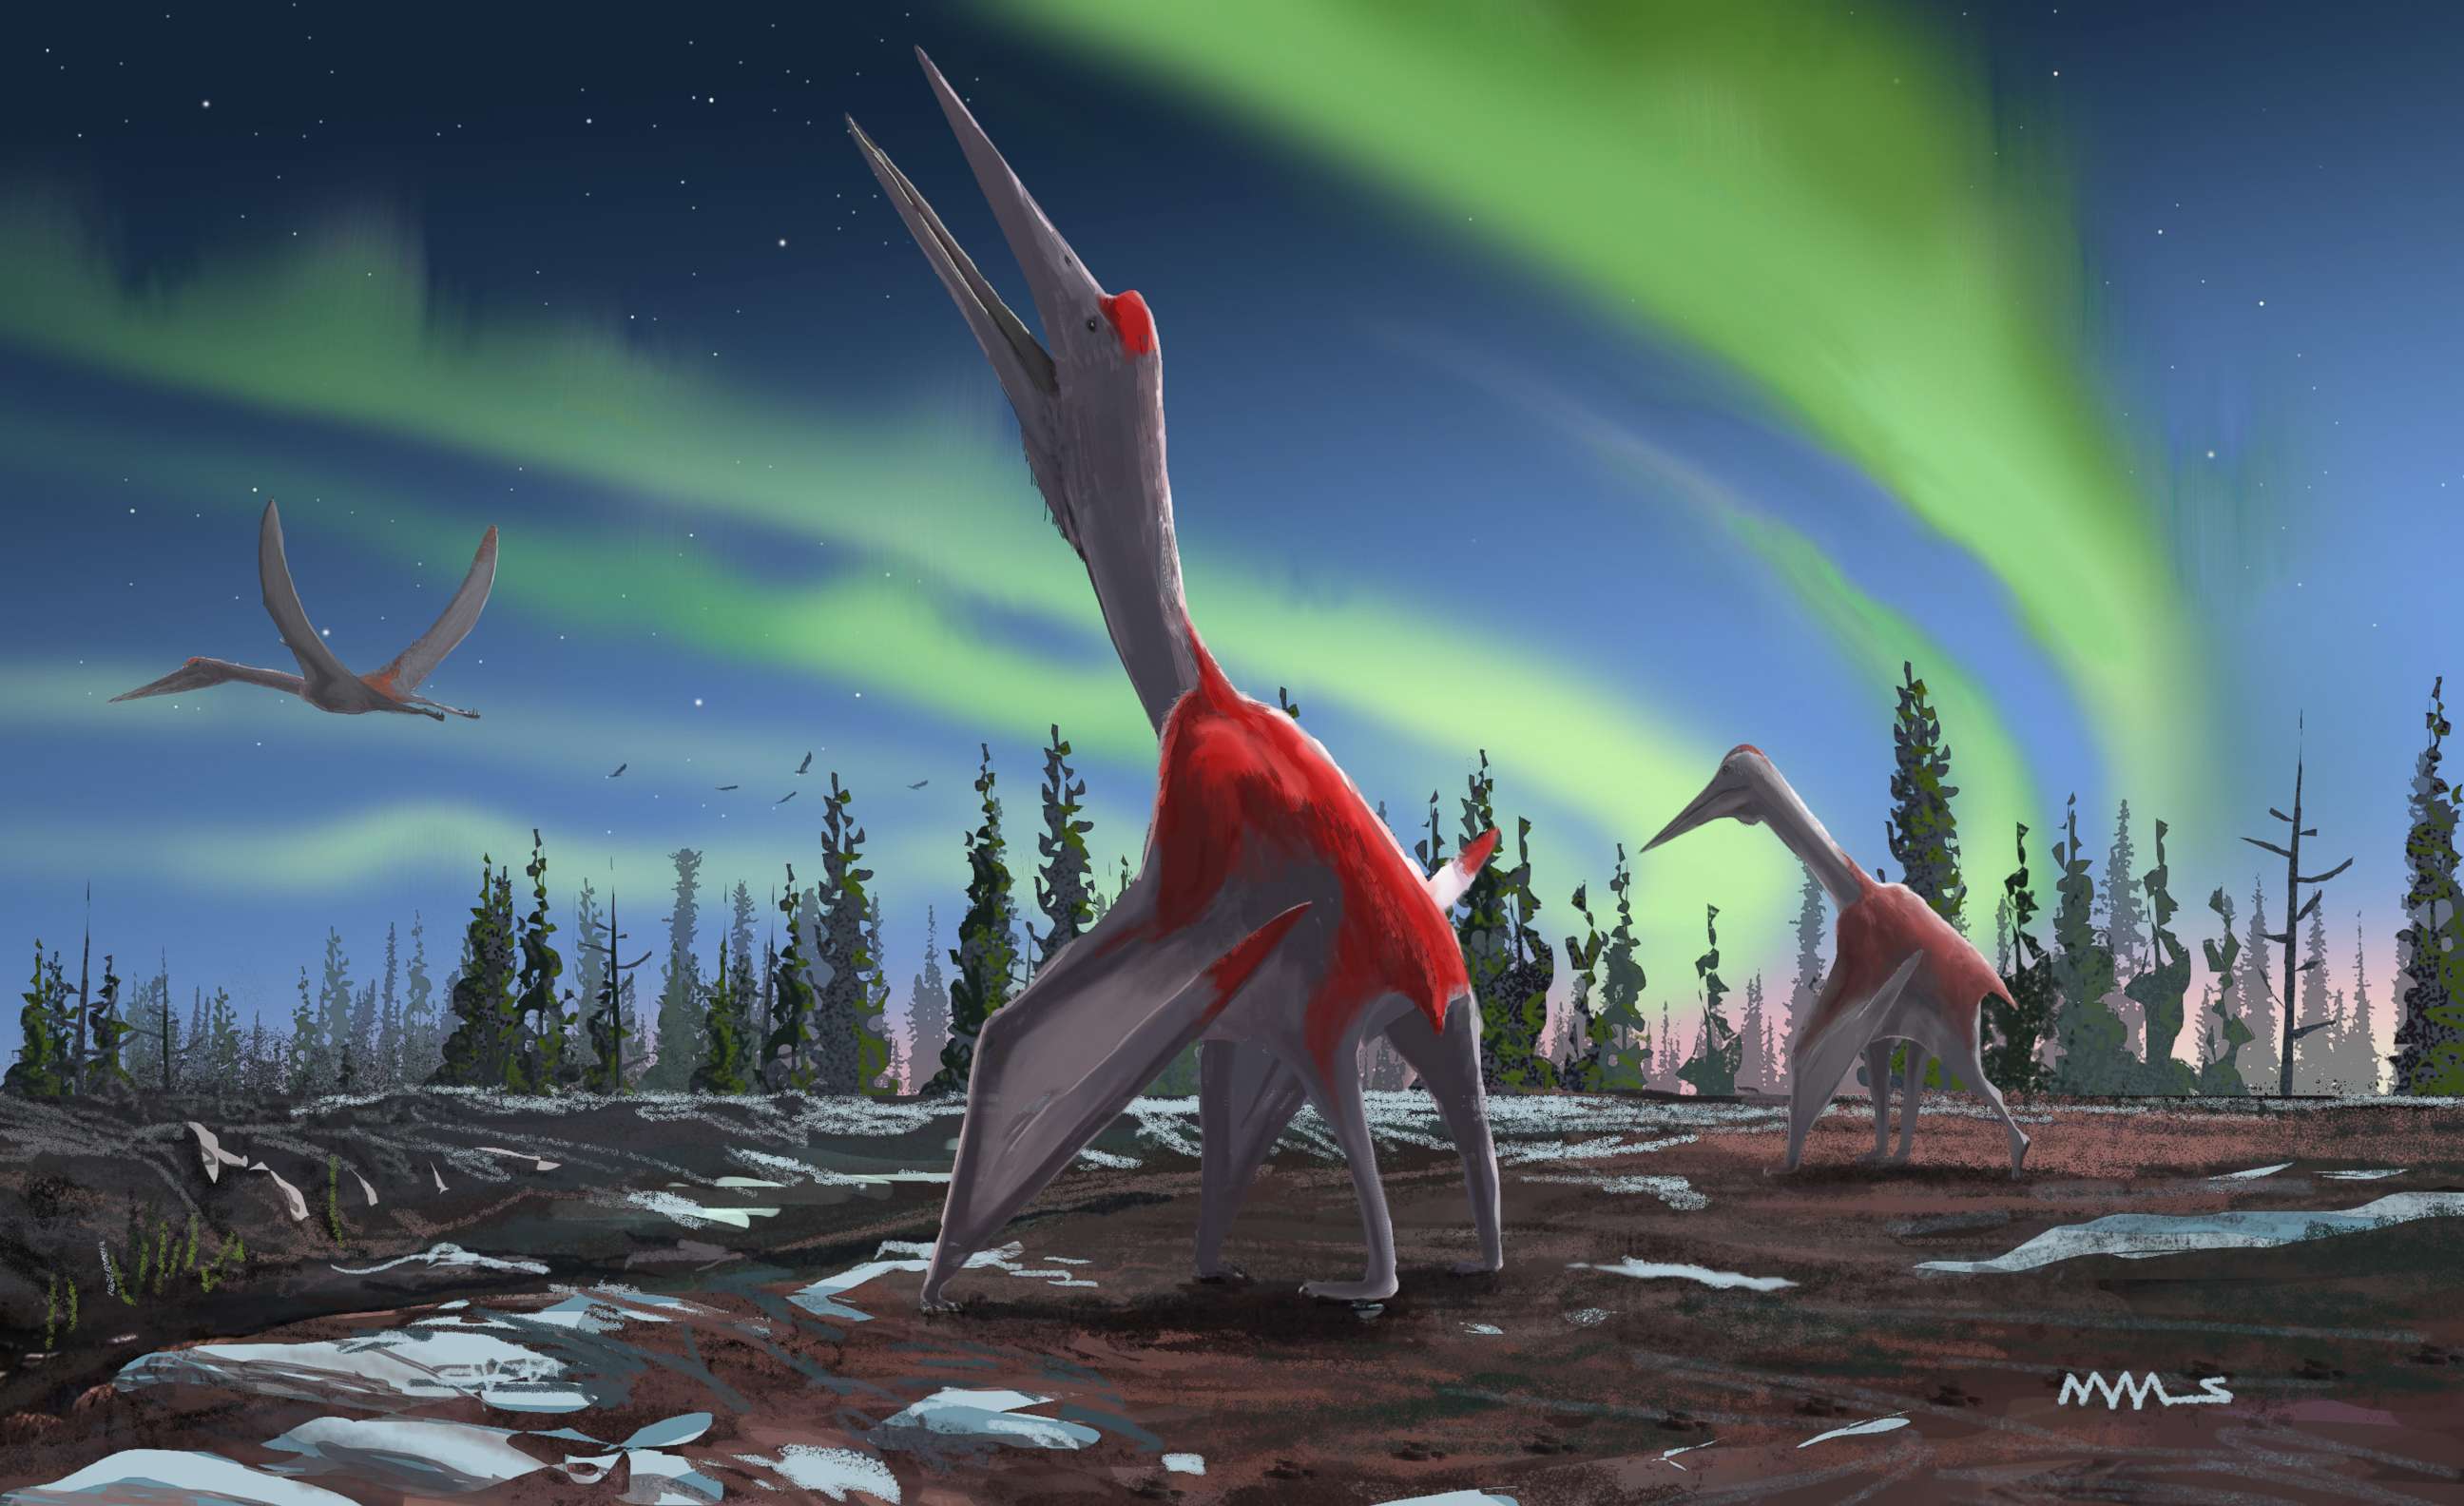 PHOTO: An illustration of what the recently discovered Cryodrakon could possibly look like. 